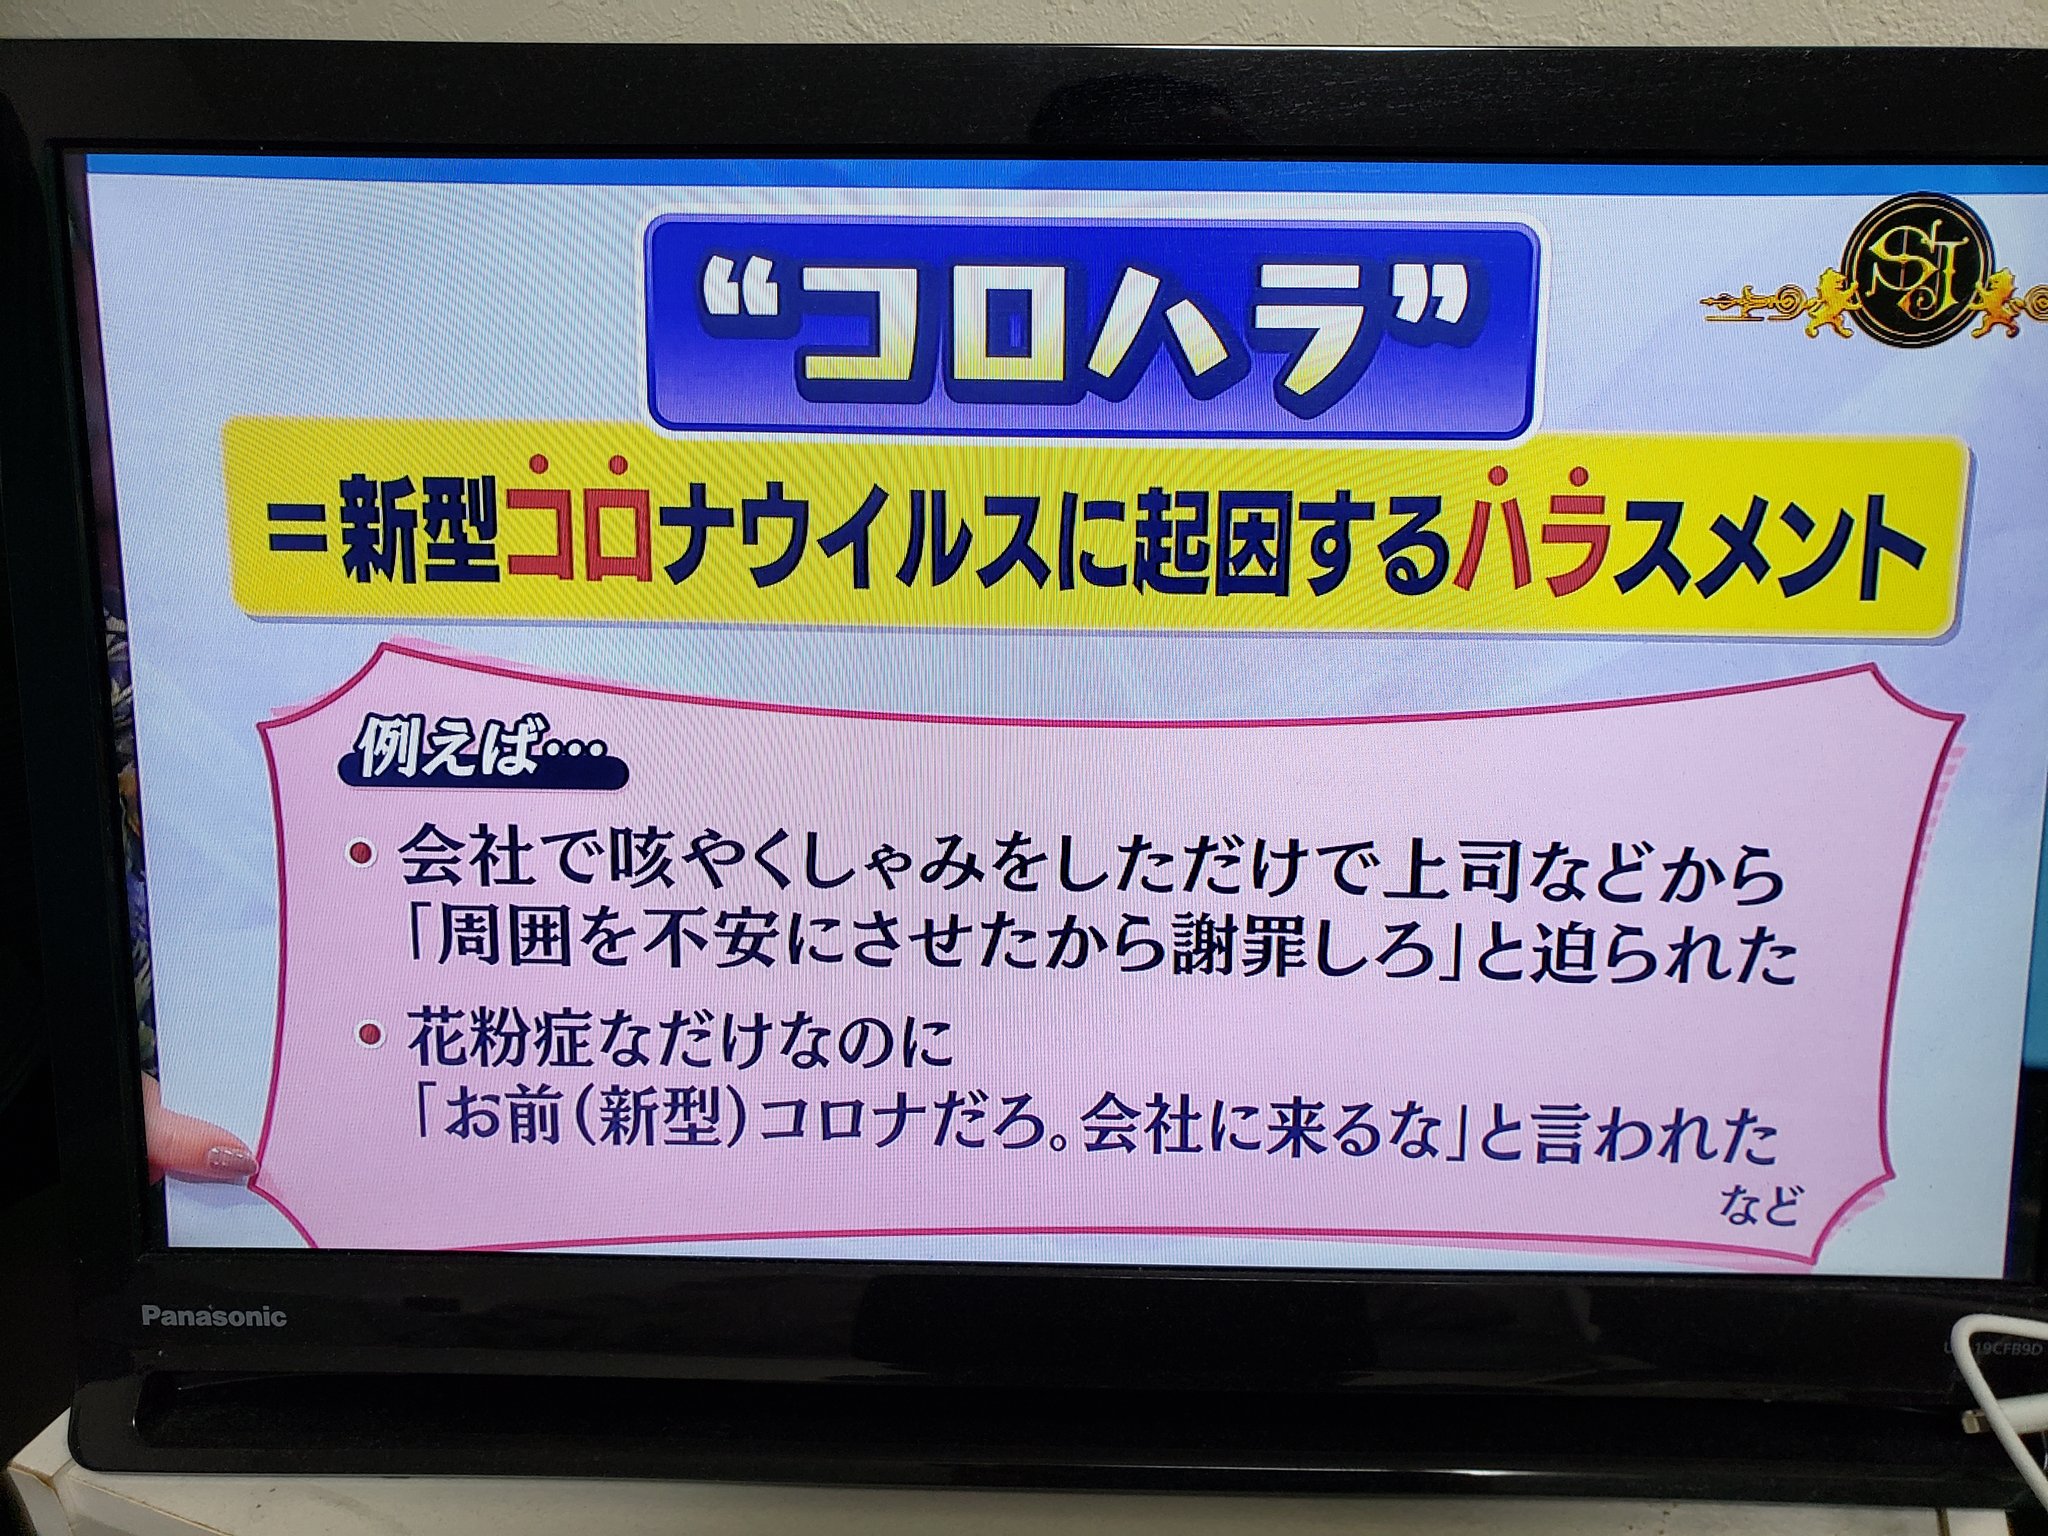 Tomohiro Osaki In Fallout From Covid19 Corohara Coronavirus Harassment Is Apparently Now Emerging In Japanese Workplace As Some People Are Forced To Apologize Or Told Not To Show Up